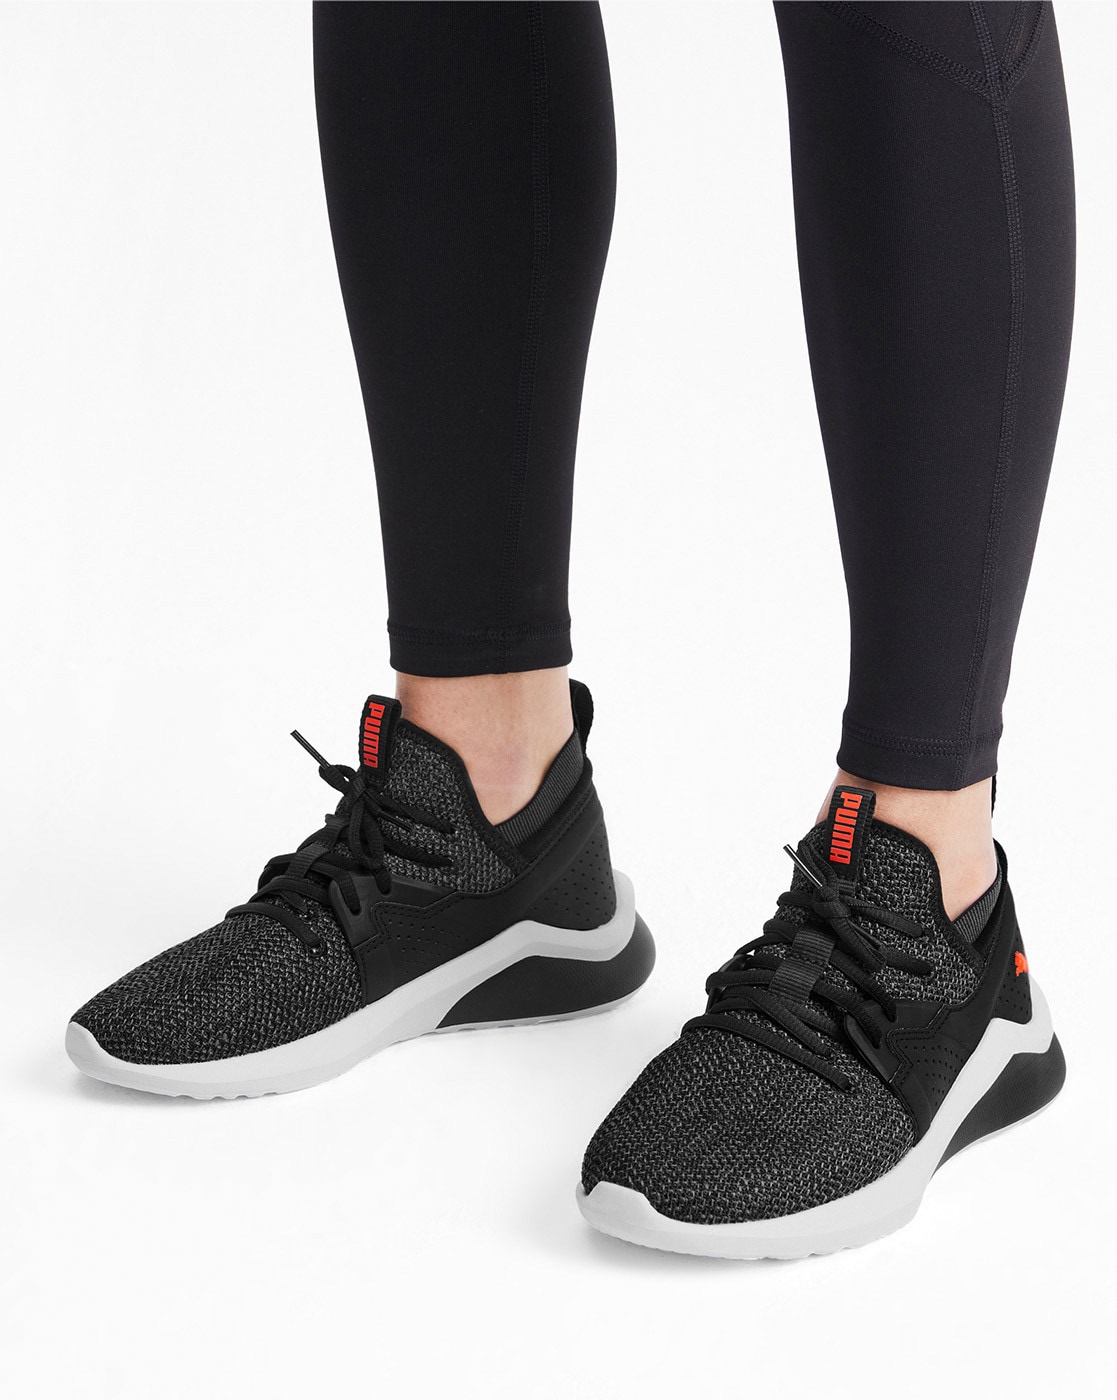 Black Sports Shoes for Women by Puma 